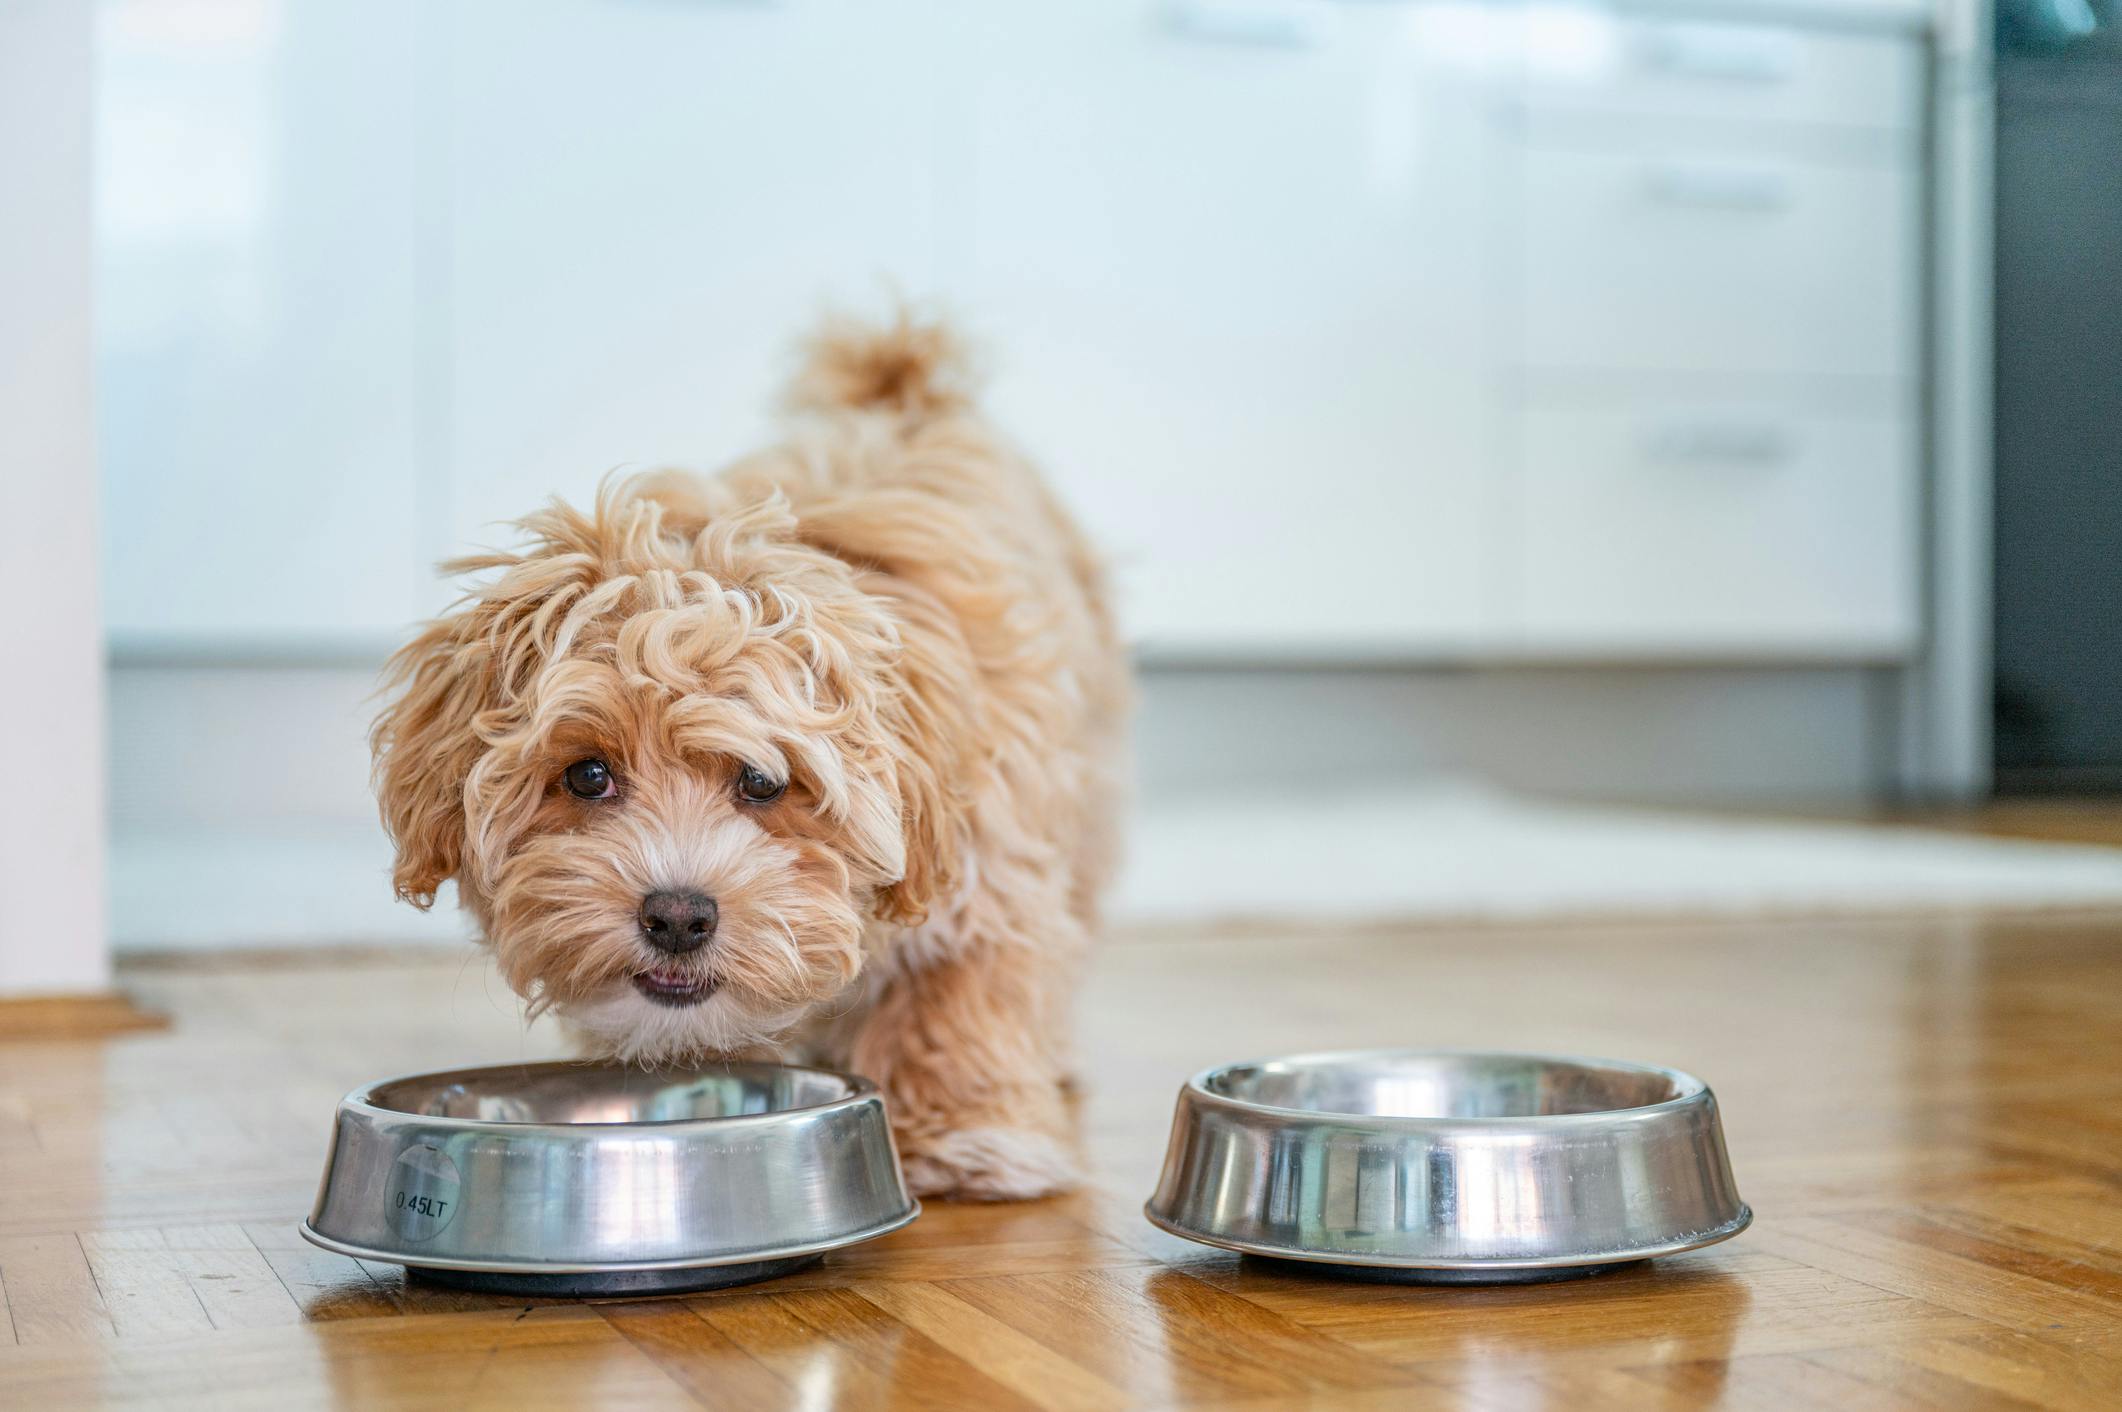 Small dog eating out of a stainless steel bowl on the floor.